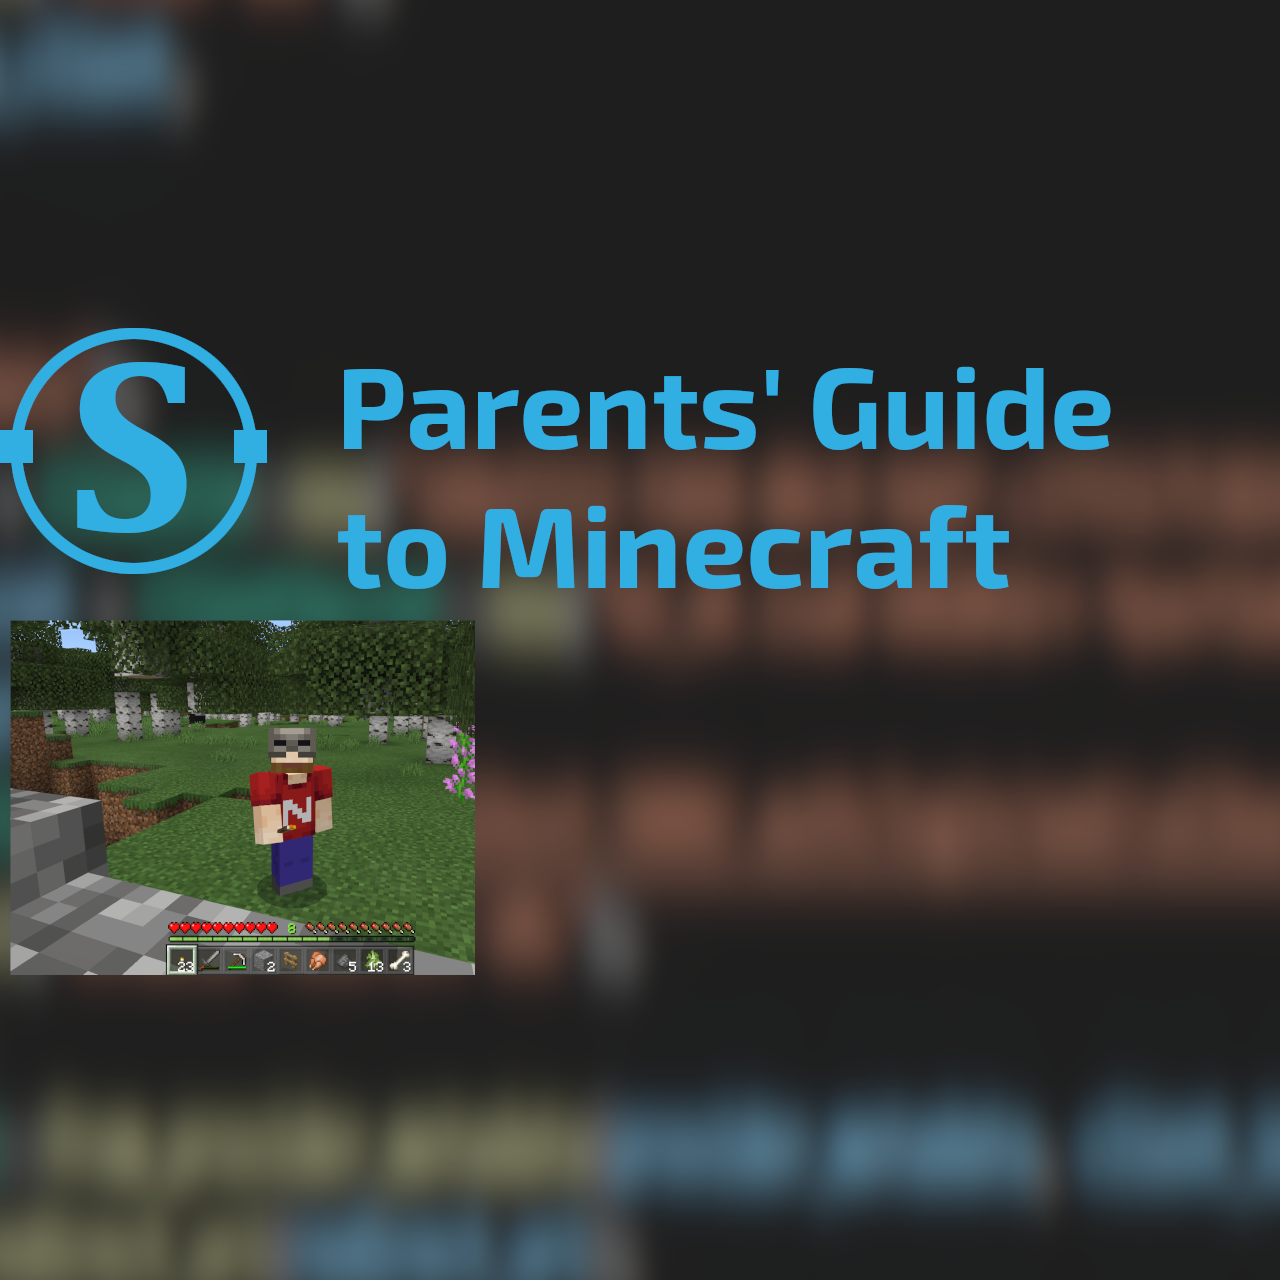 Purchasing Minecraft, The Minecraft Guide for Parents: Getting Started